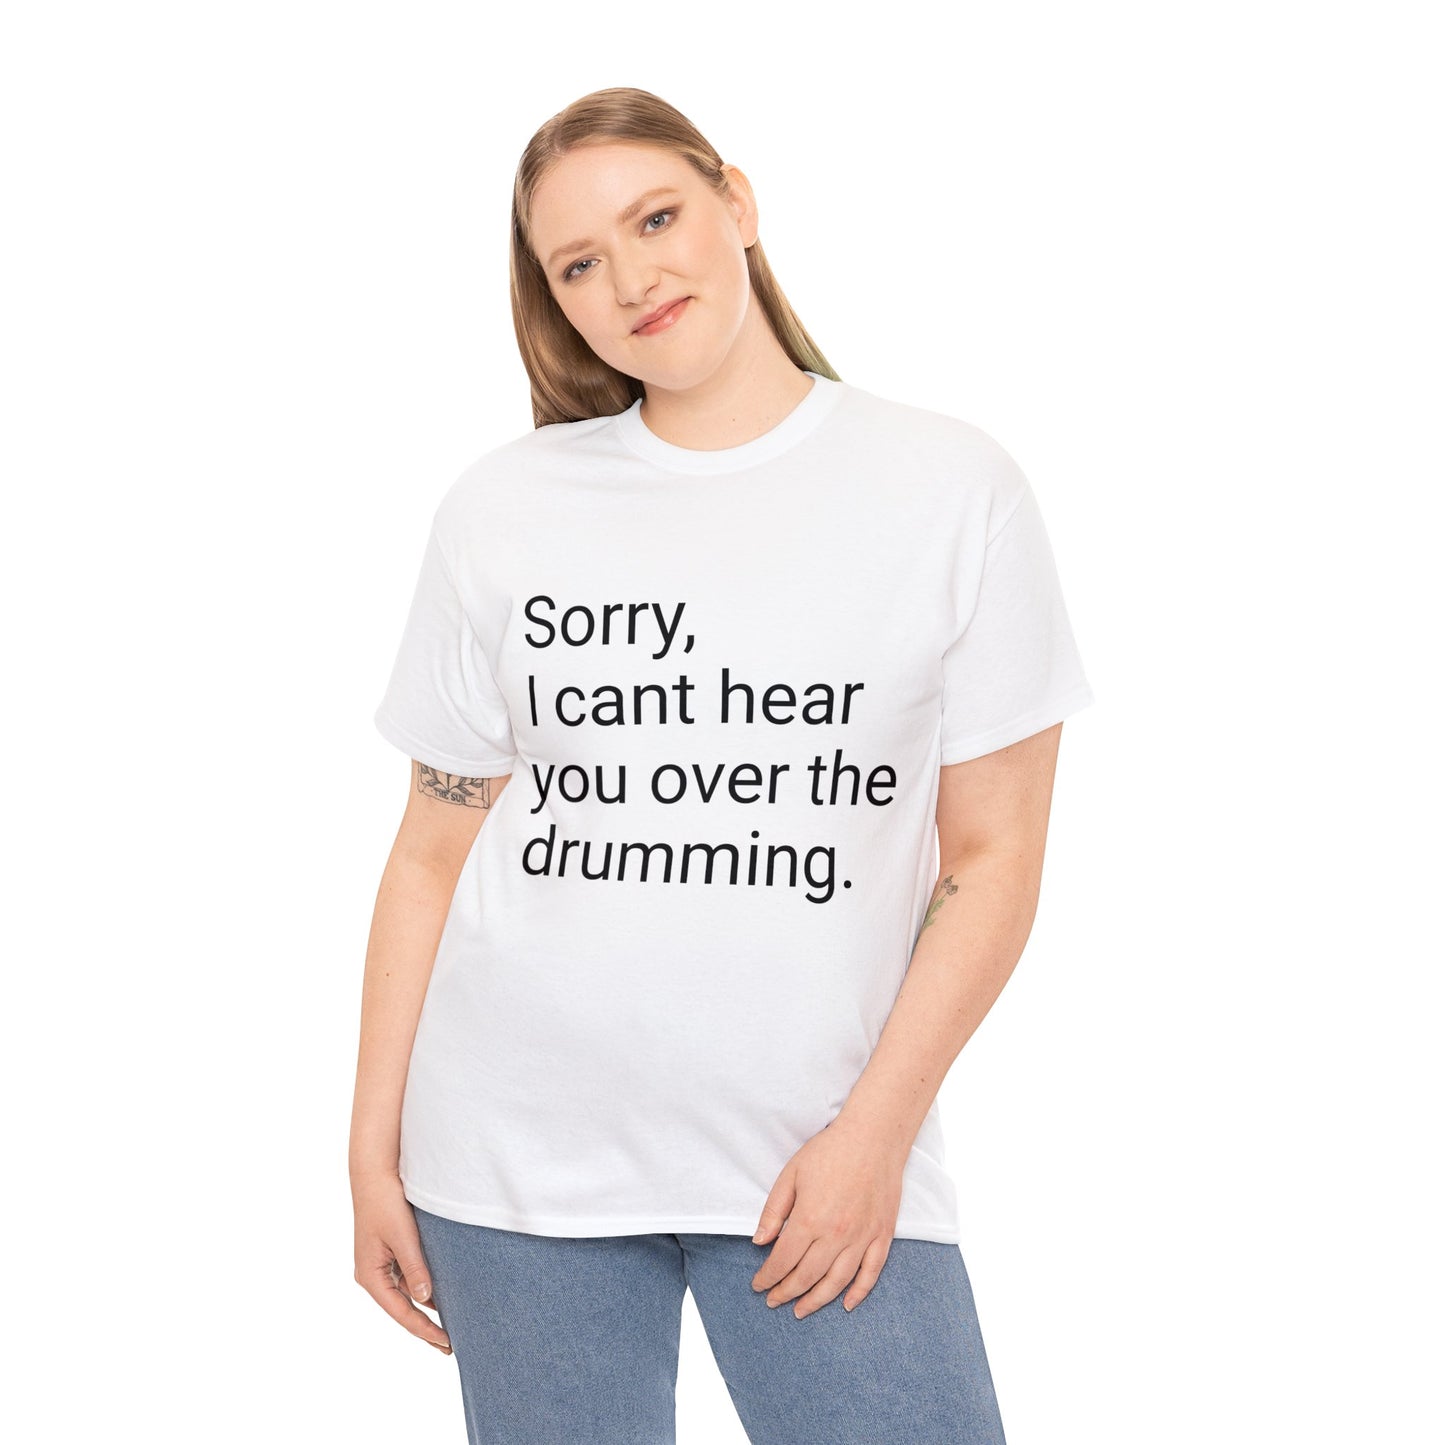 Sorry, I Can't Hear You Over the Drums T-Shirt